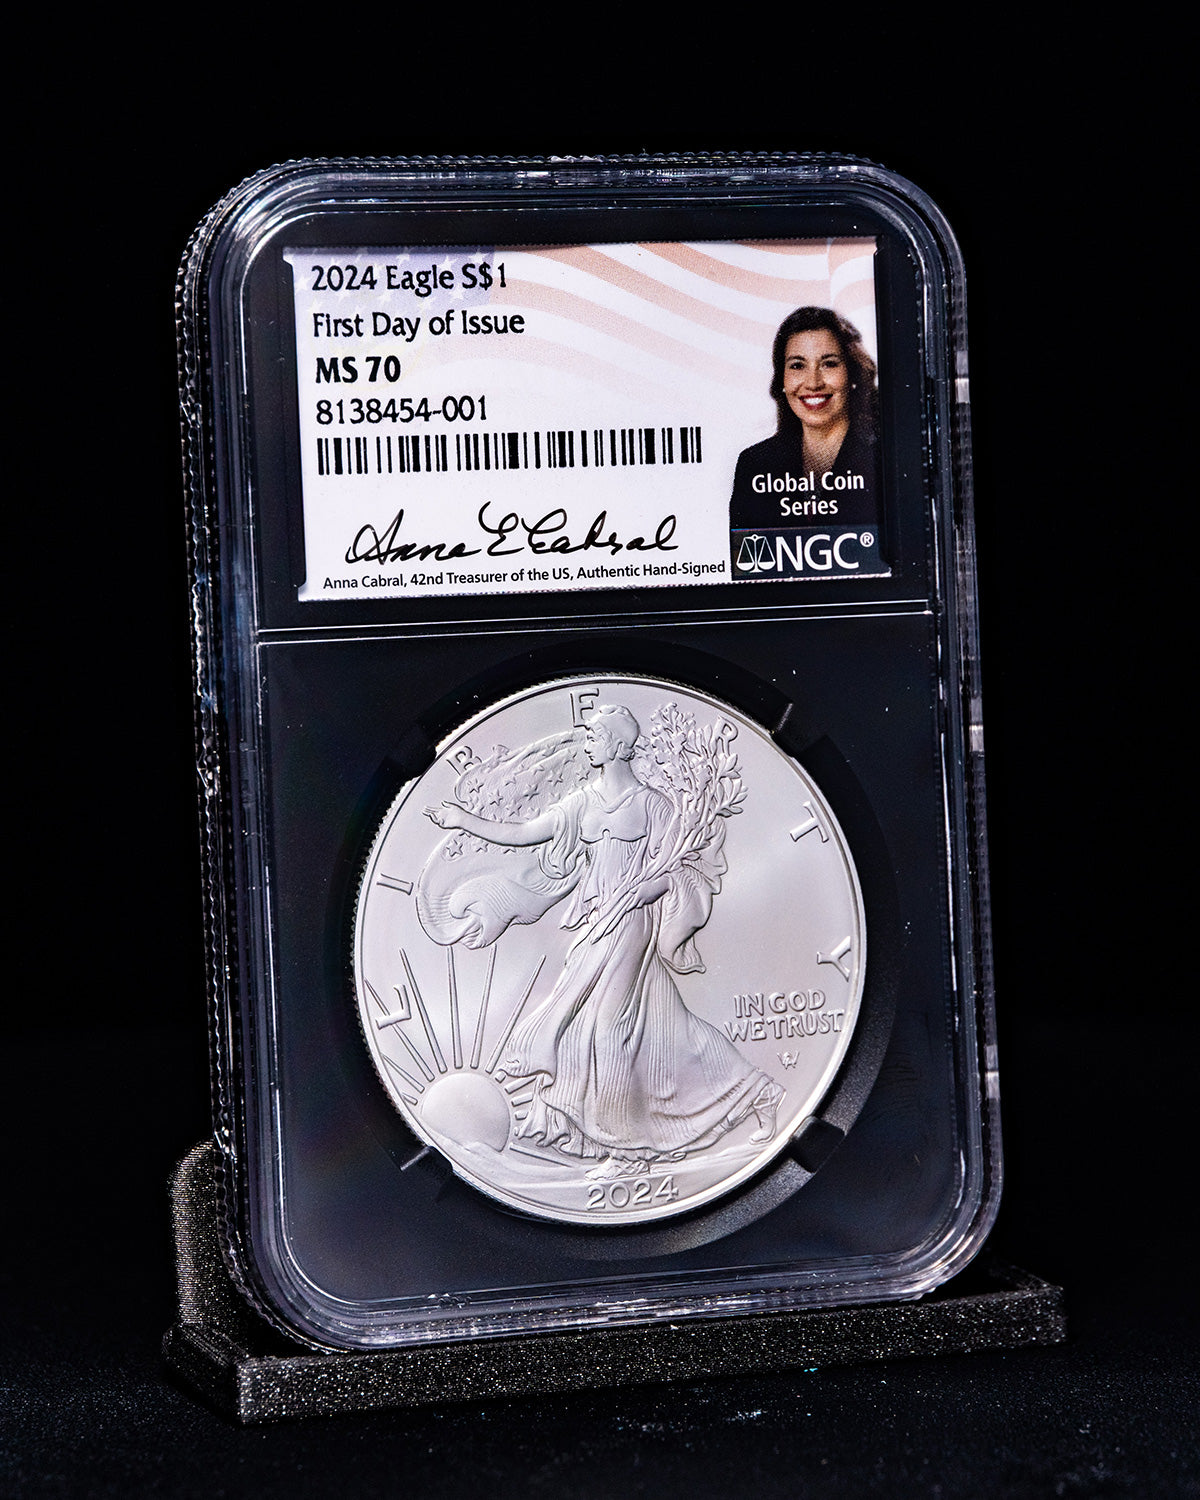 2024 $1 Silver Eagle | First Day of Issue Global Coin Series NGC MS70 | Anna Cabral Autographed